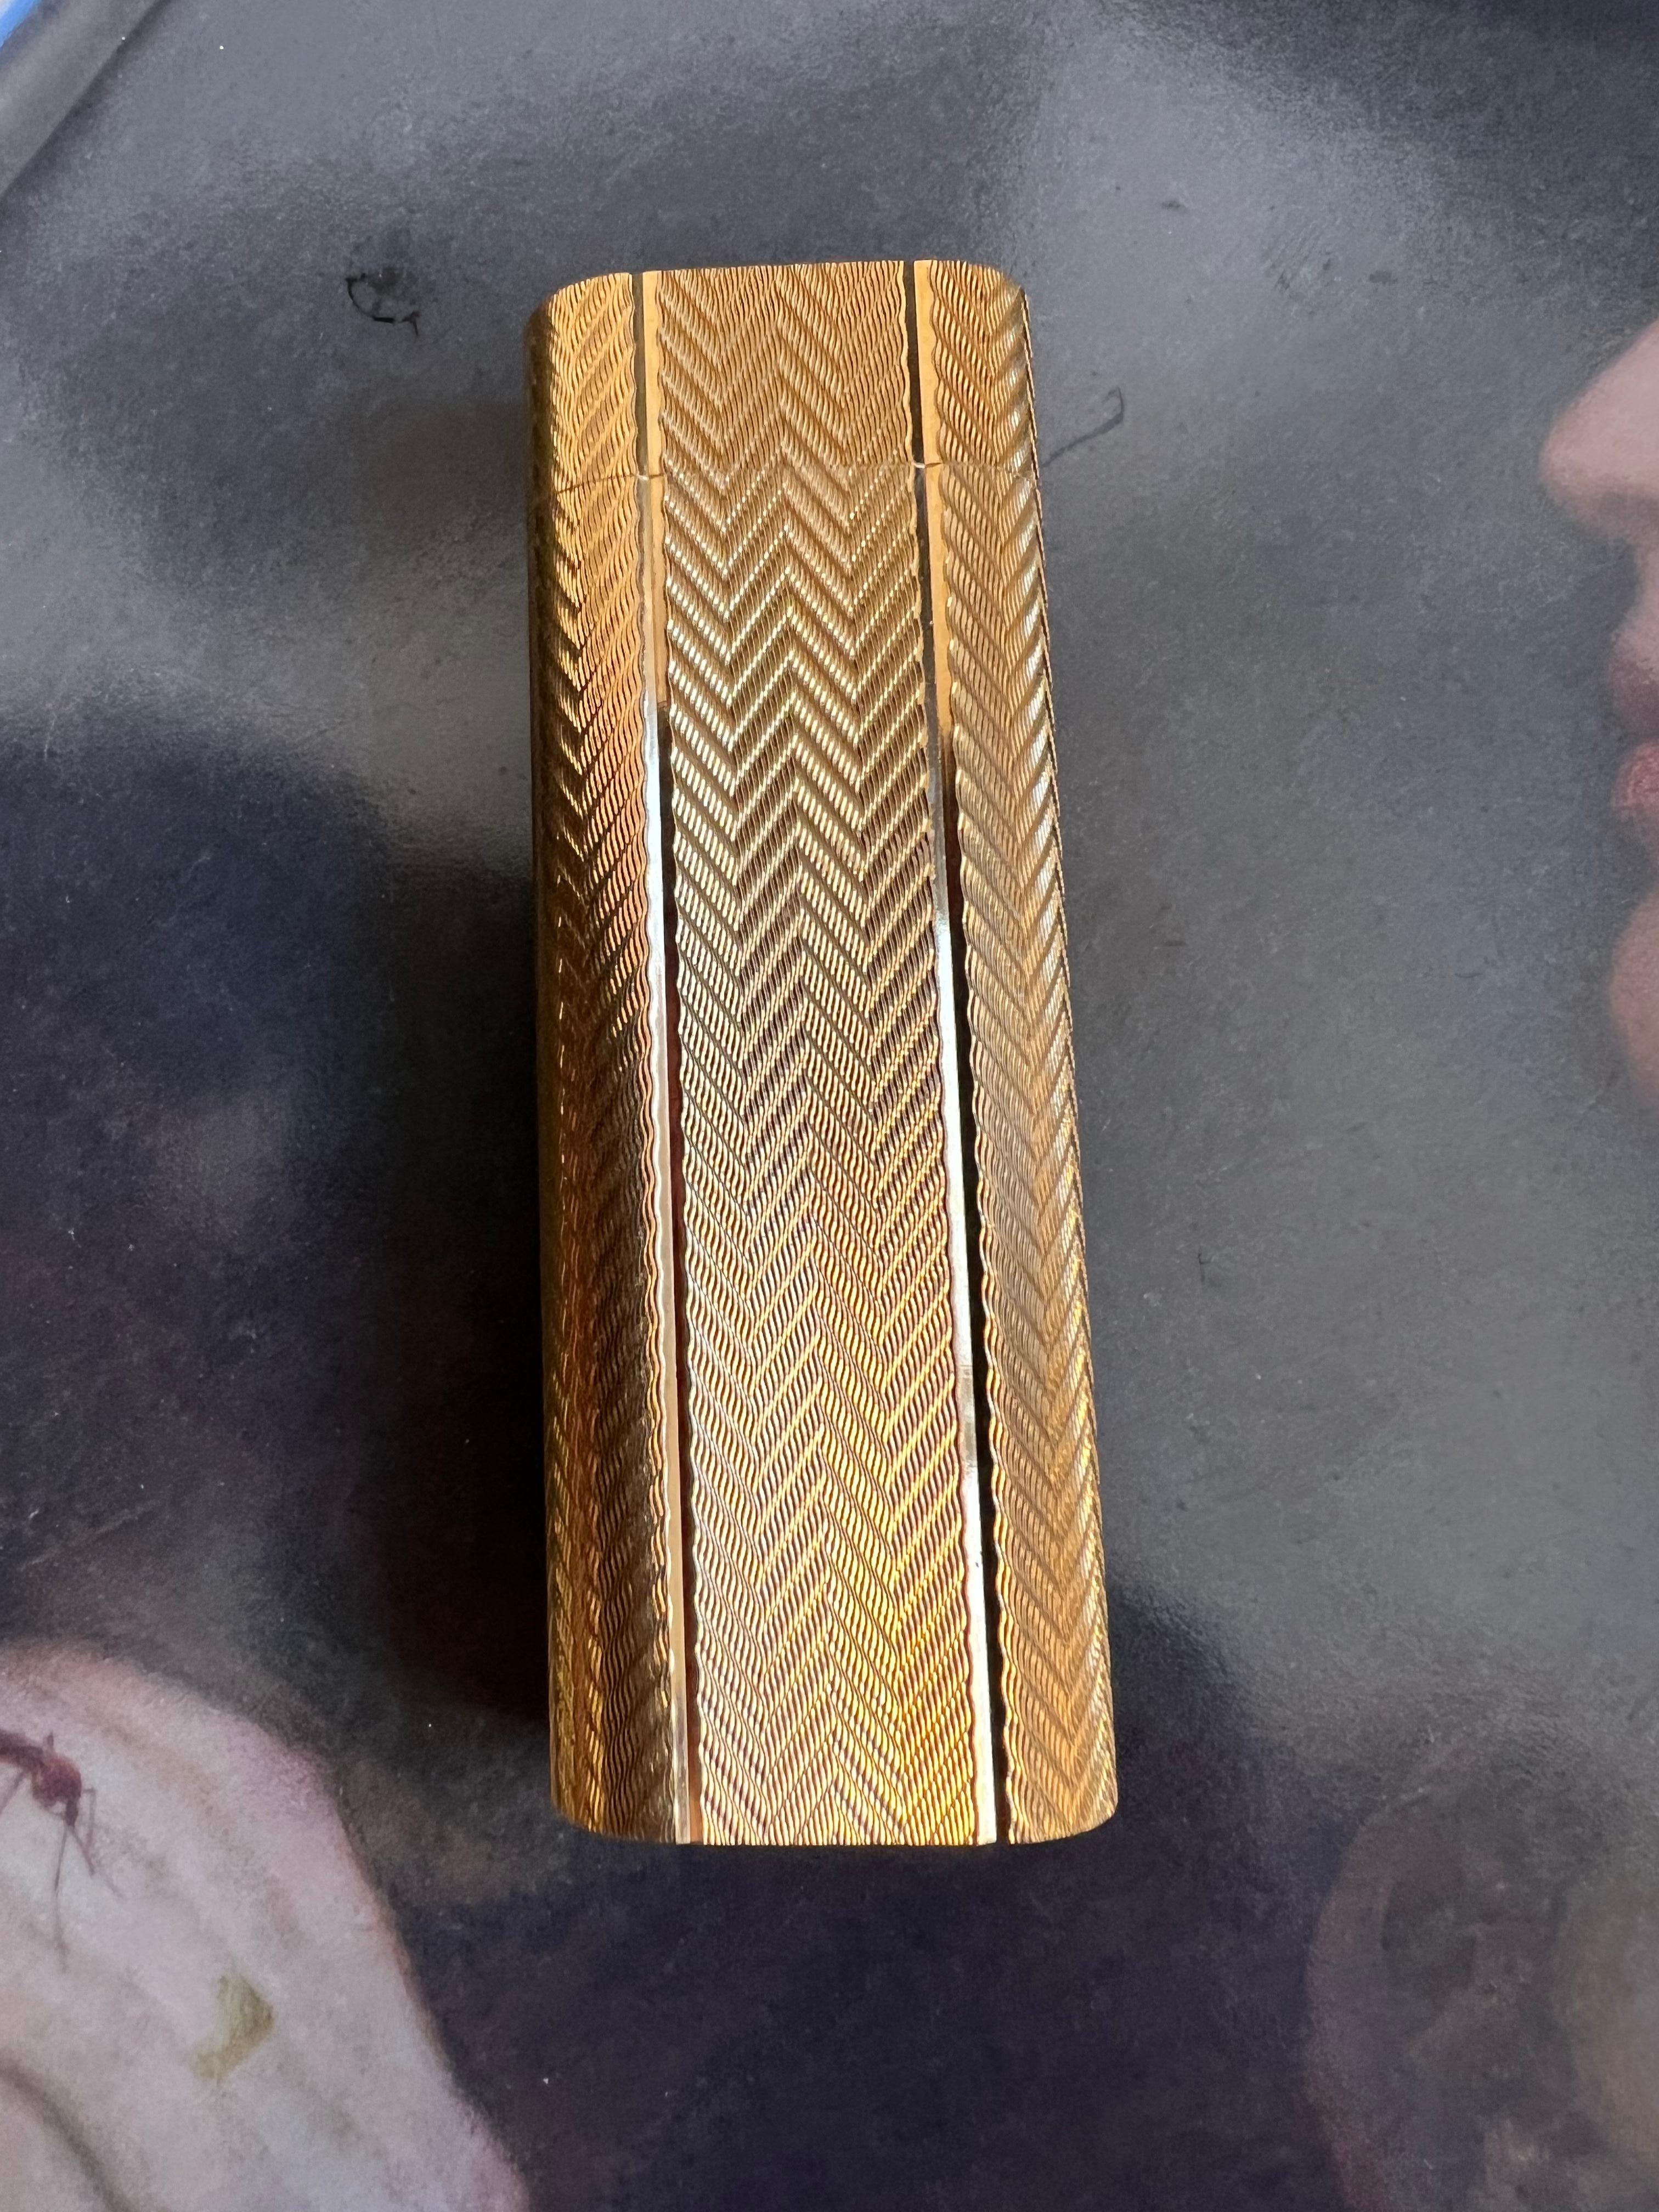 Vintage and Retro Cartier gold plated lighter 
A Les Must De Cartier Paris 18k gold plated lighter
Retro, elegant and chic 
In mint working condition, sparks, ignites and flame. 
Comes with original Cartier box and certificate.
Perfect gift
